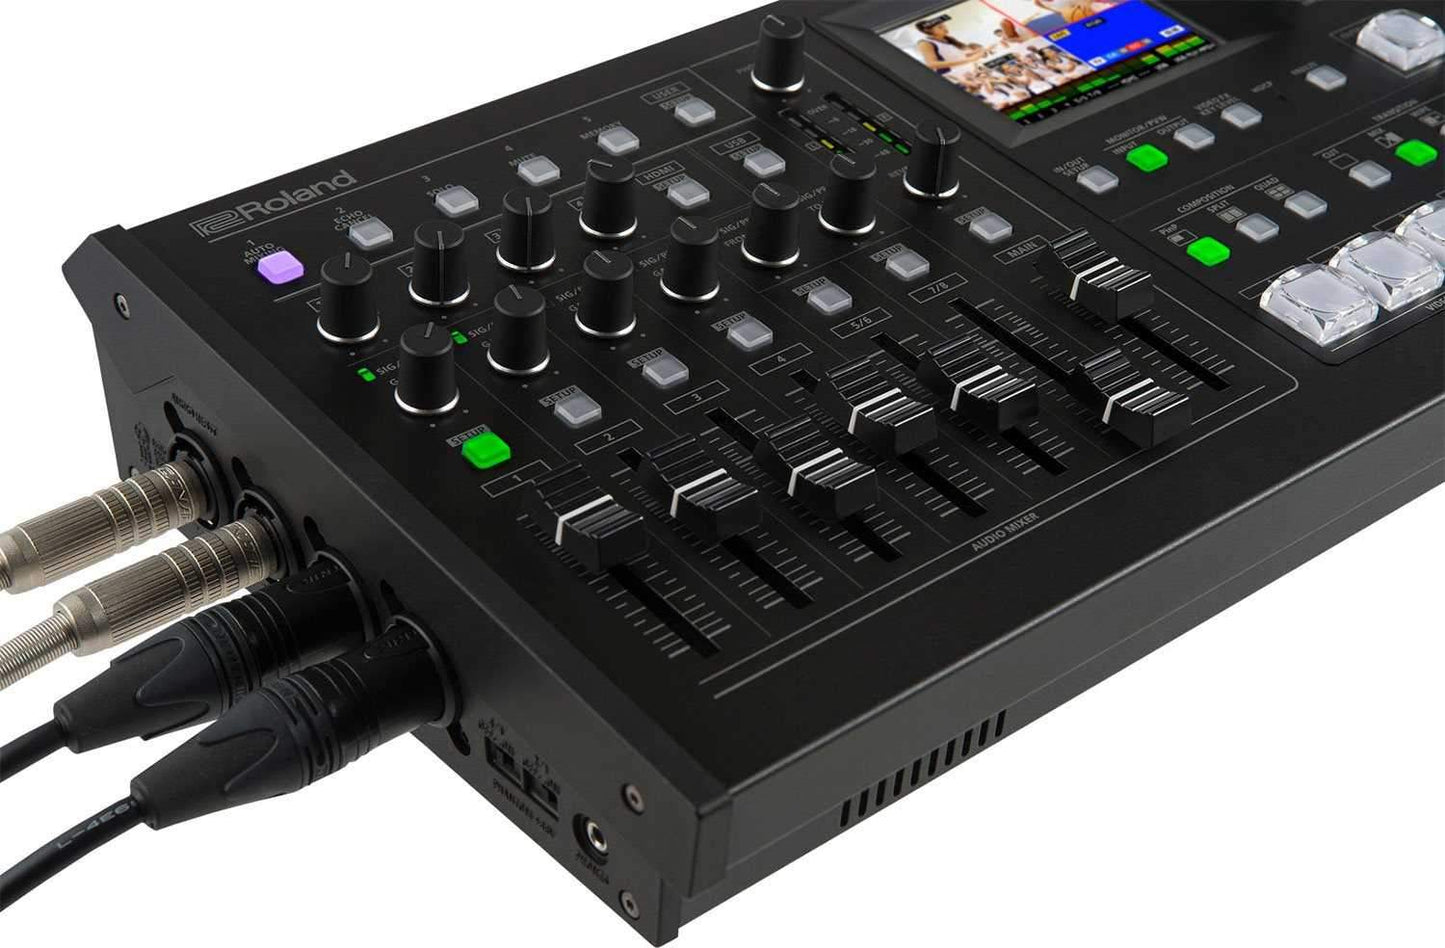 Roland VR4-HD All-in-One HD Video Mixer with USB 3.0 - PSSL ProSound and Stage Lighting